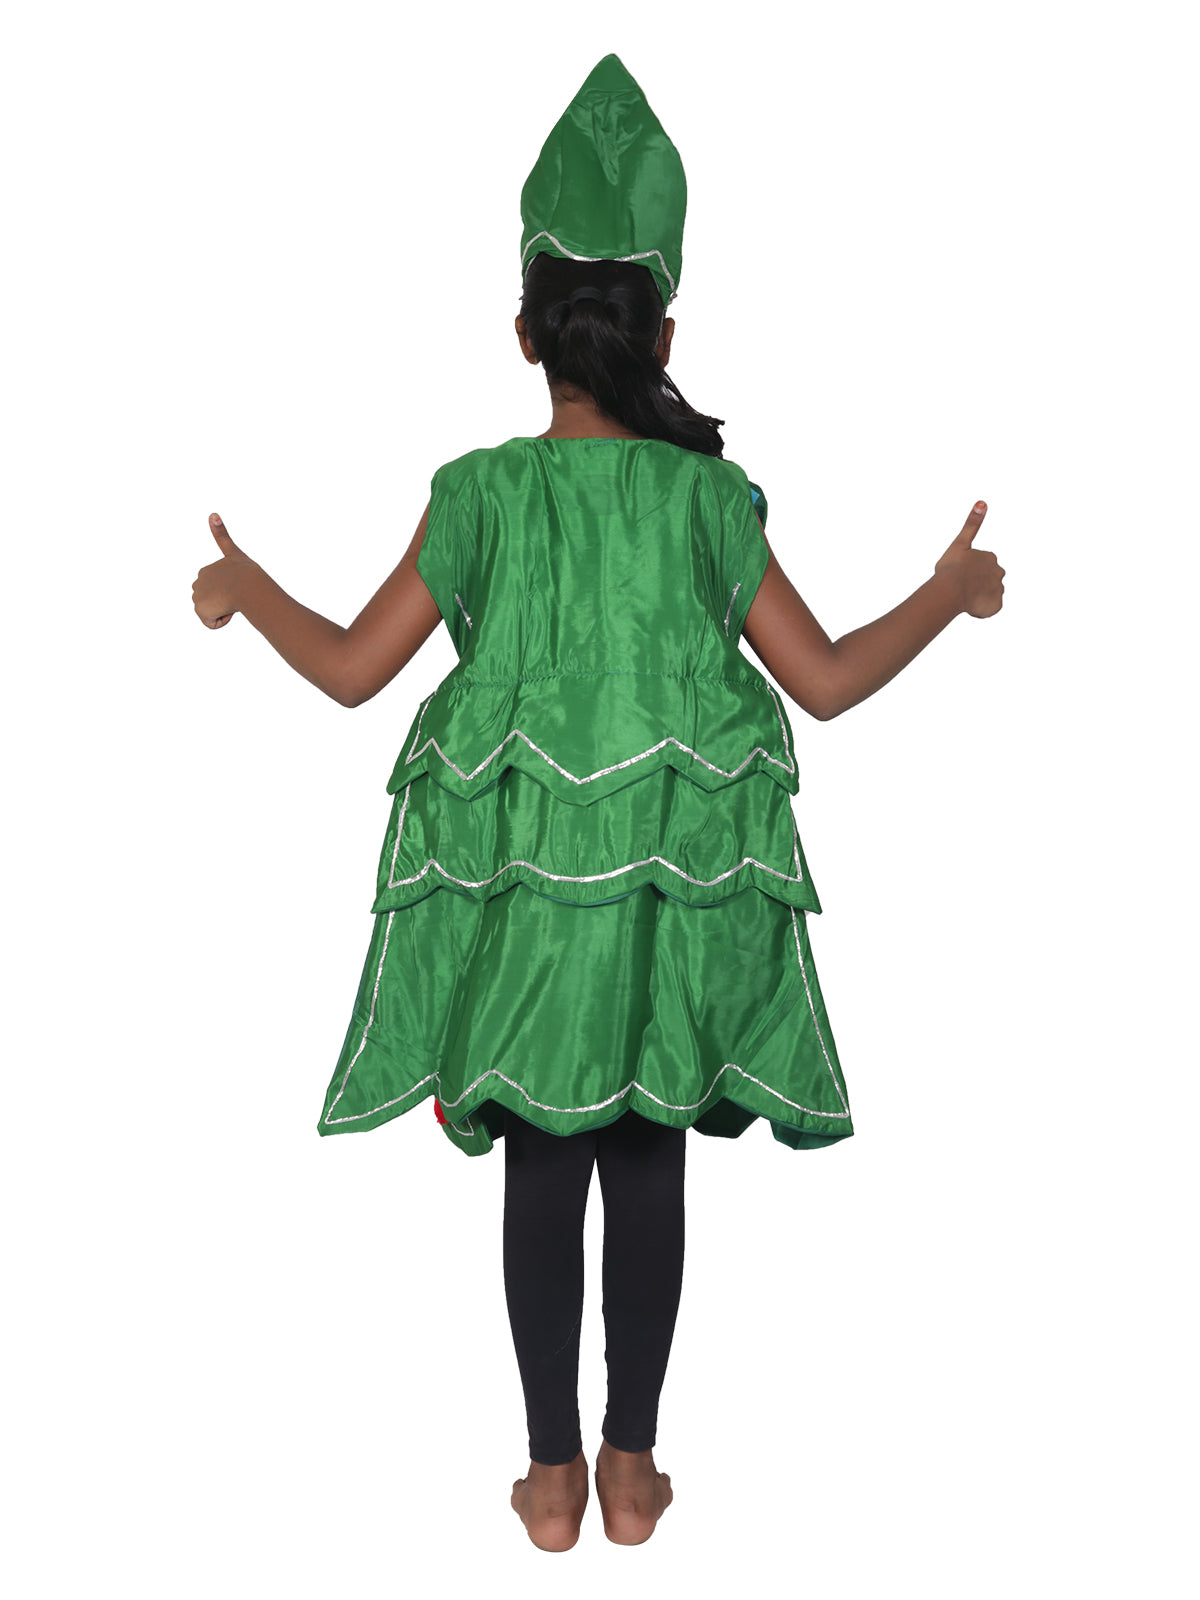 Buy BookMyCostume Green and Brown Tree Kids Fancy Dress Costume 10-12 years  Online at Low Prices in India - Amazon.in